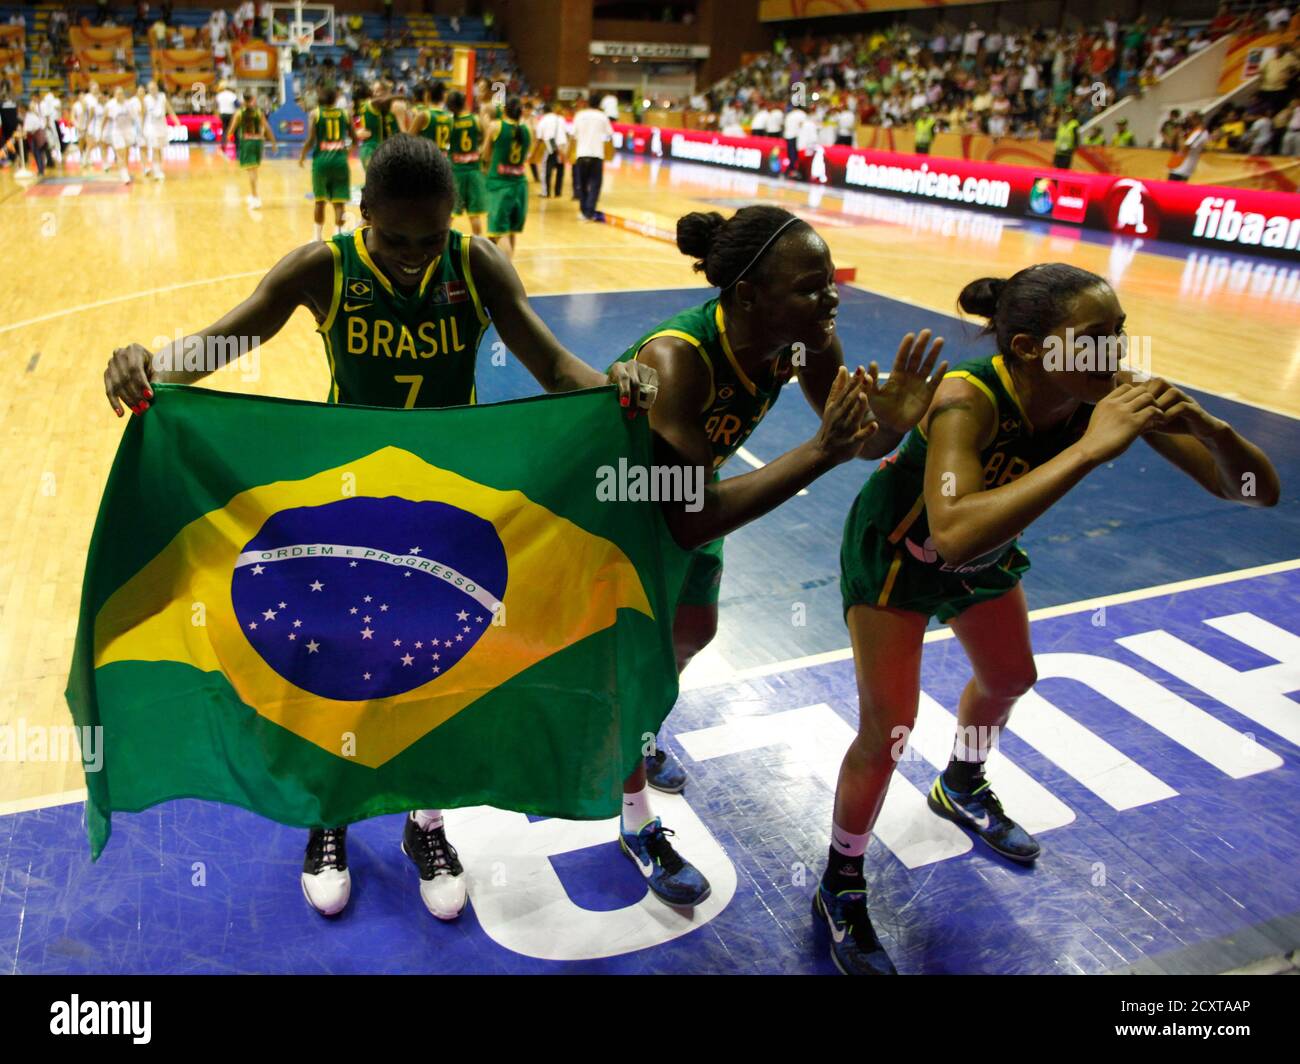 Brazil's team celebrates after defeating Argentina in the final round of the FIBA Americas Championship for Women in Neiva October 1, 2011. REUTERS/John Vizcaino (COLOMBIA - Tags: SPORT BASKETBALL) Stock Photo